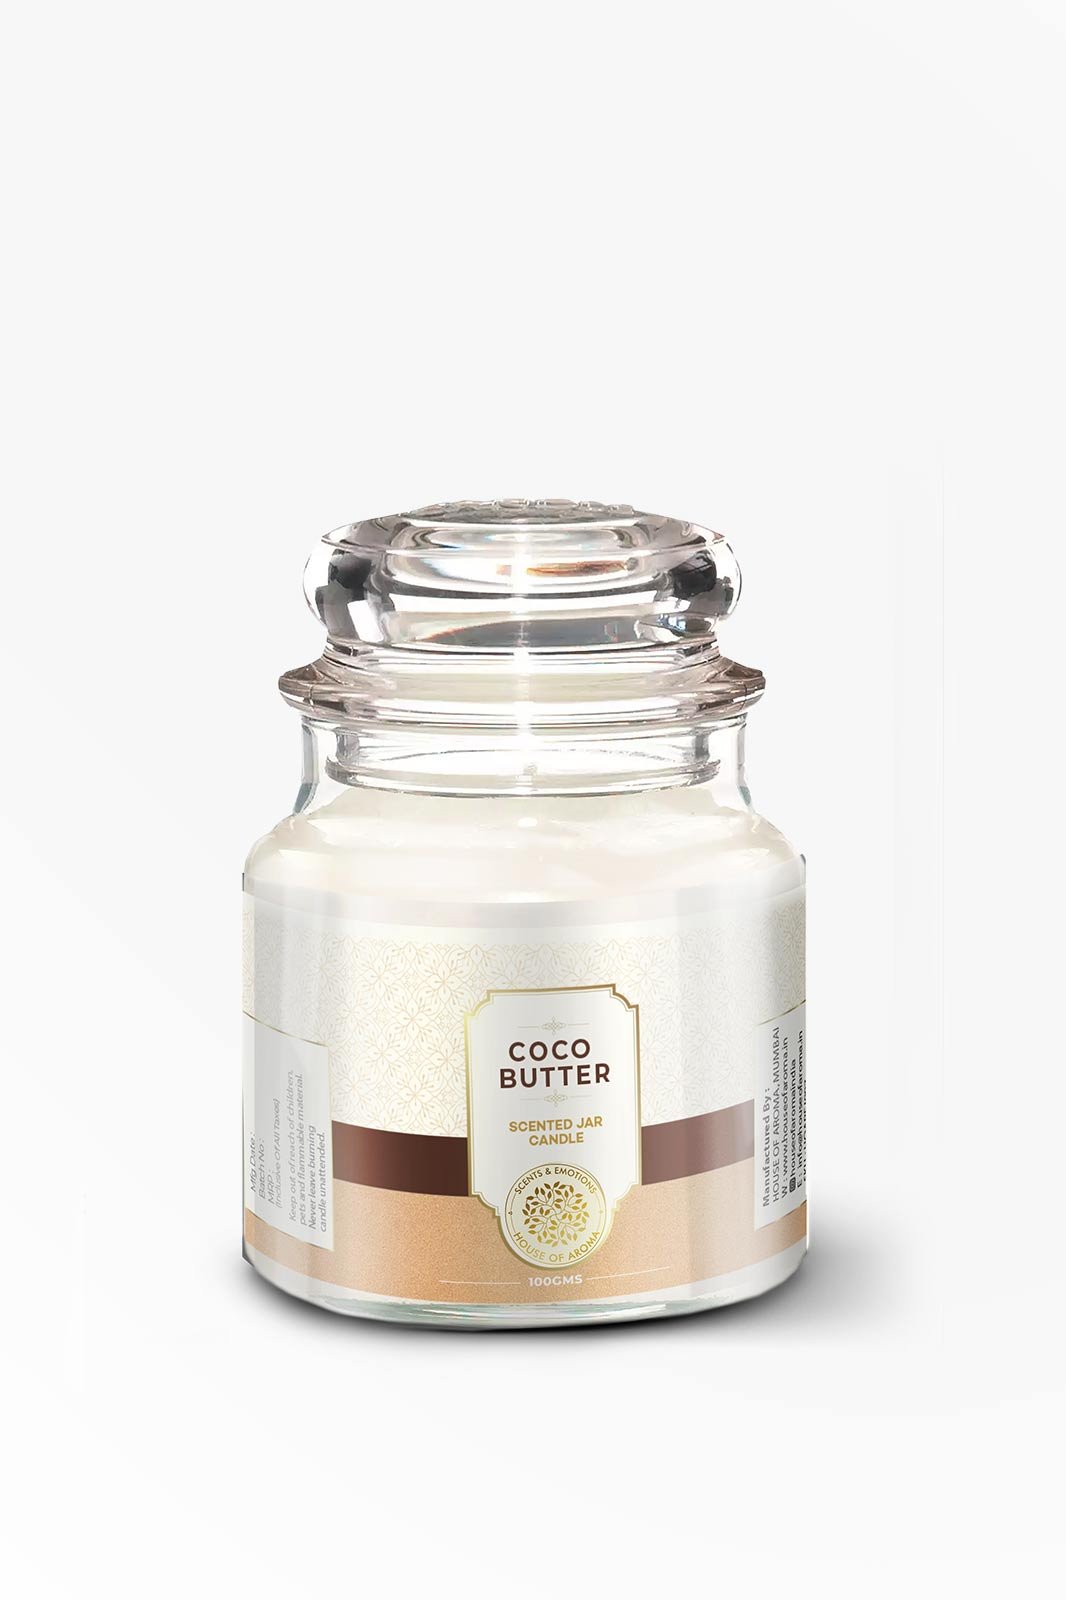 cocoa butter jar candle , scented jar candle, candle jars, glass jar candle, jar candles with lids, candles for home decor, scented candles for gifts, jar candles online, Scented bell jar candles, Scented candles, scented jar candles, house of aroma